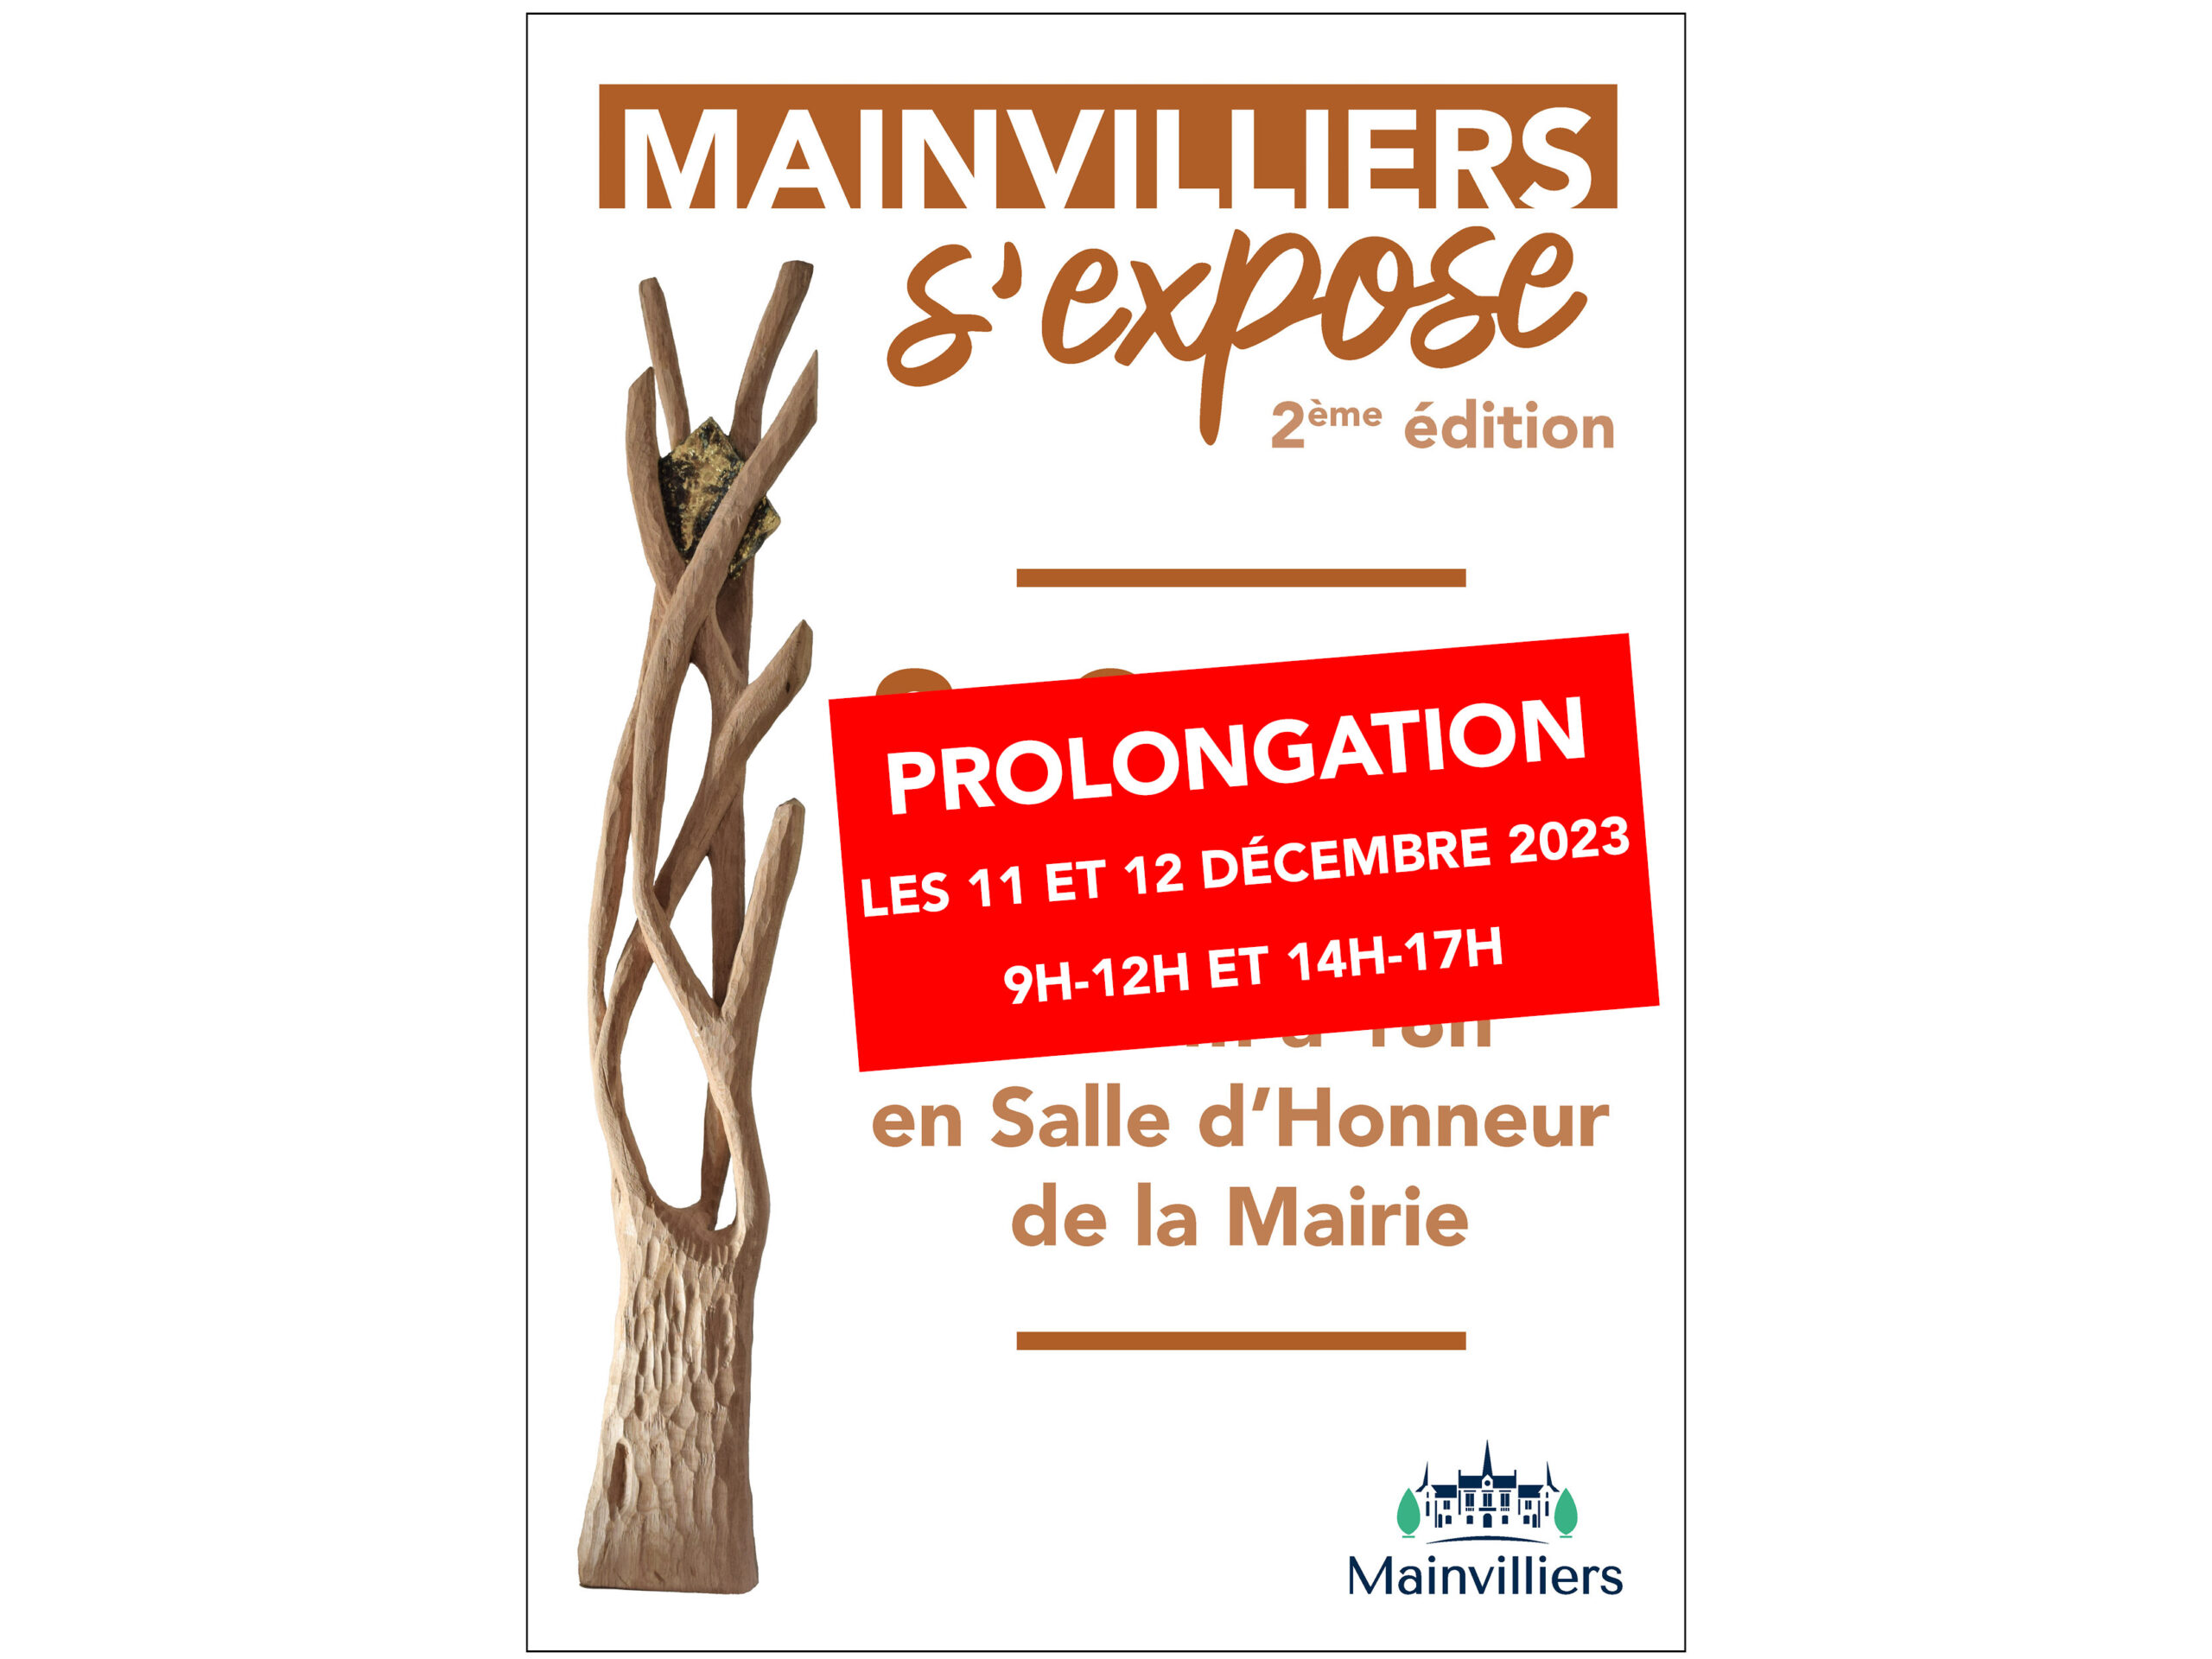 Mainvilliers s’expose